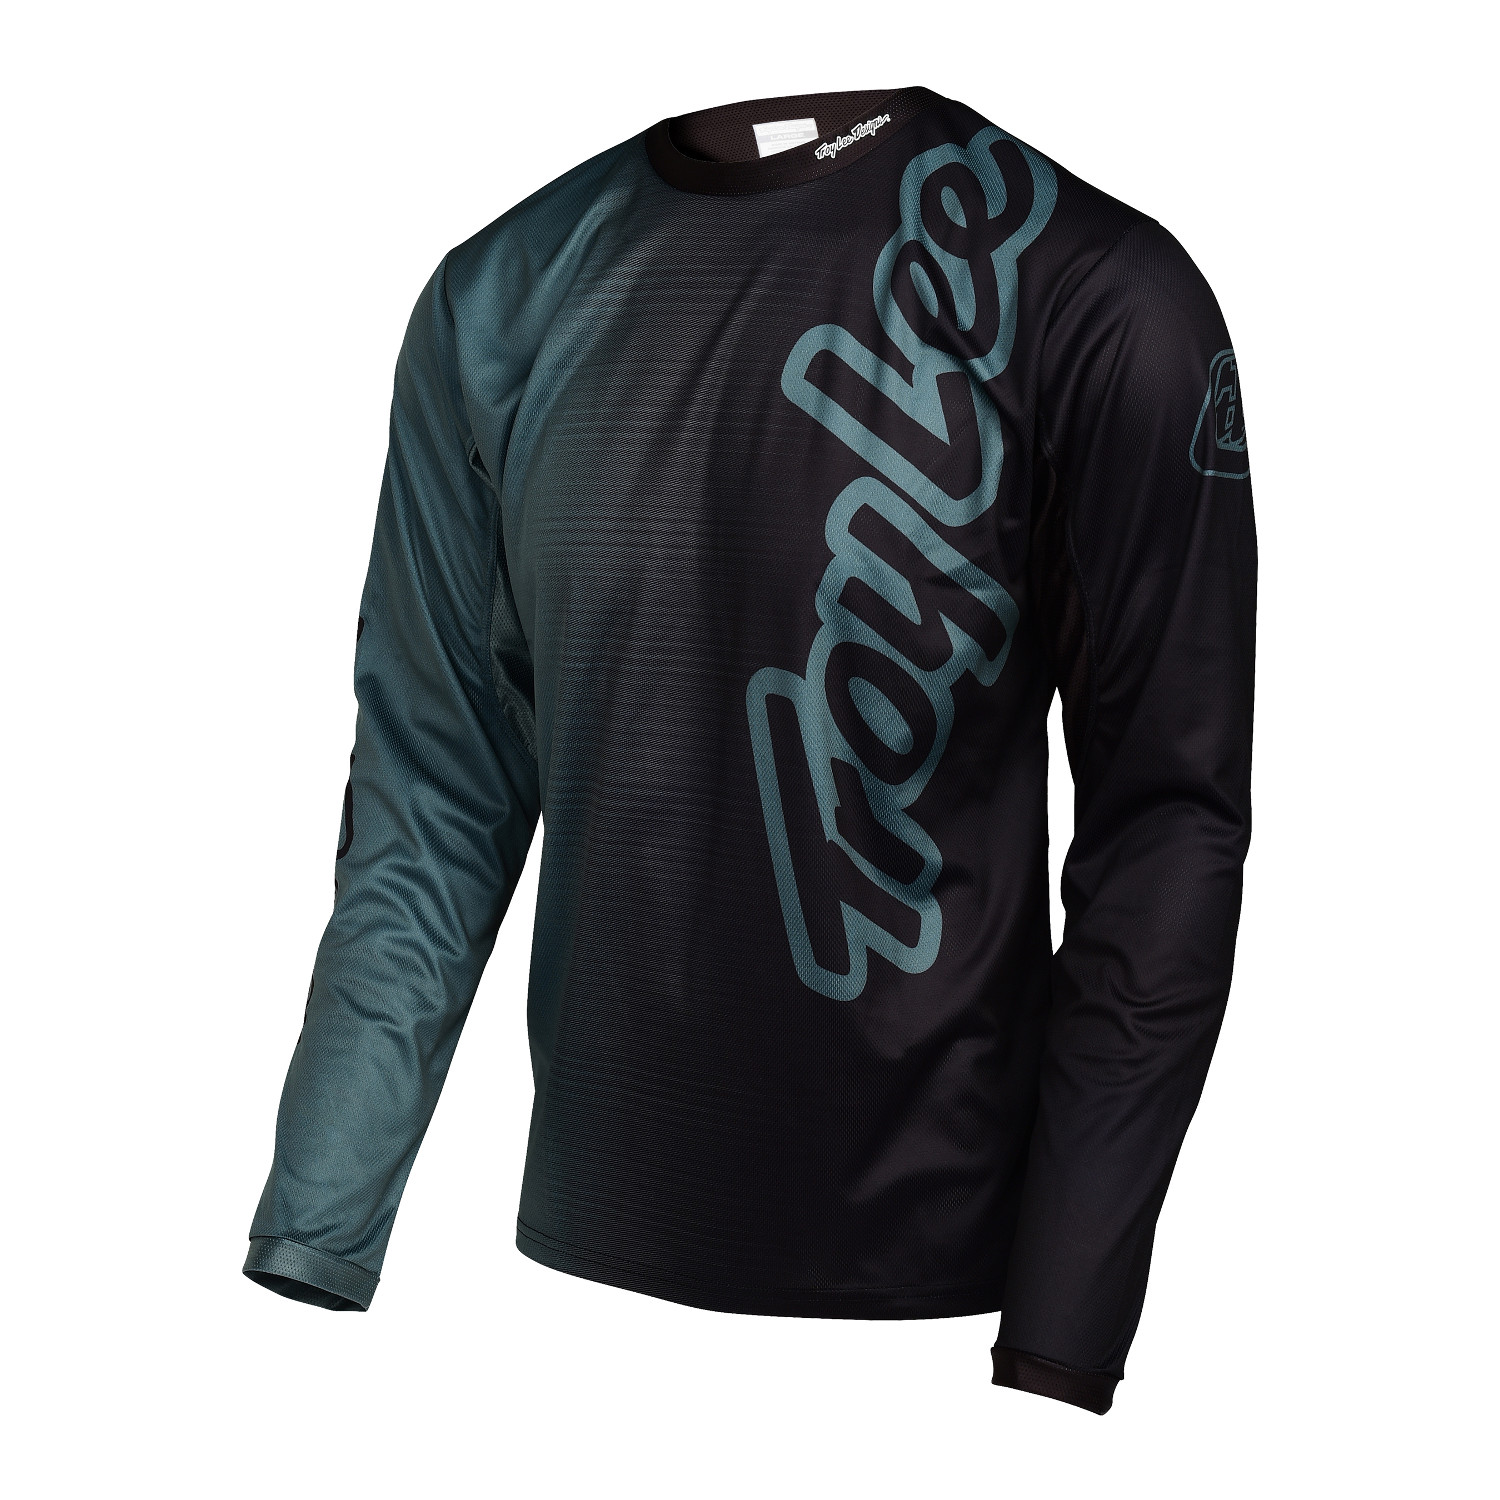 Troy Lee Designs Maillot VTT Manches Longues Sprint 50/50 - Black